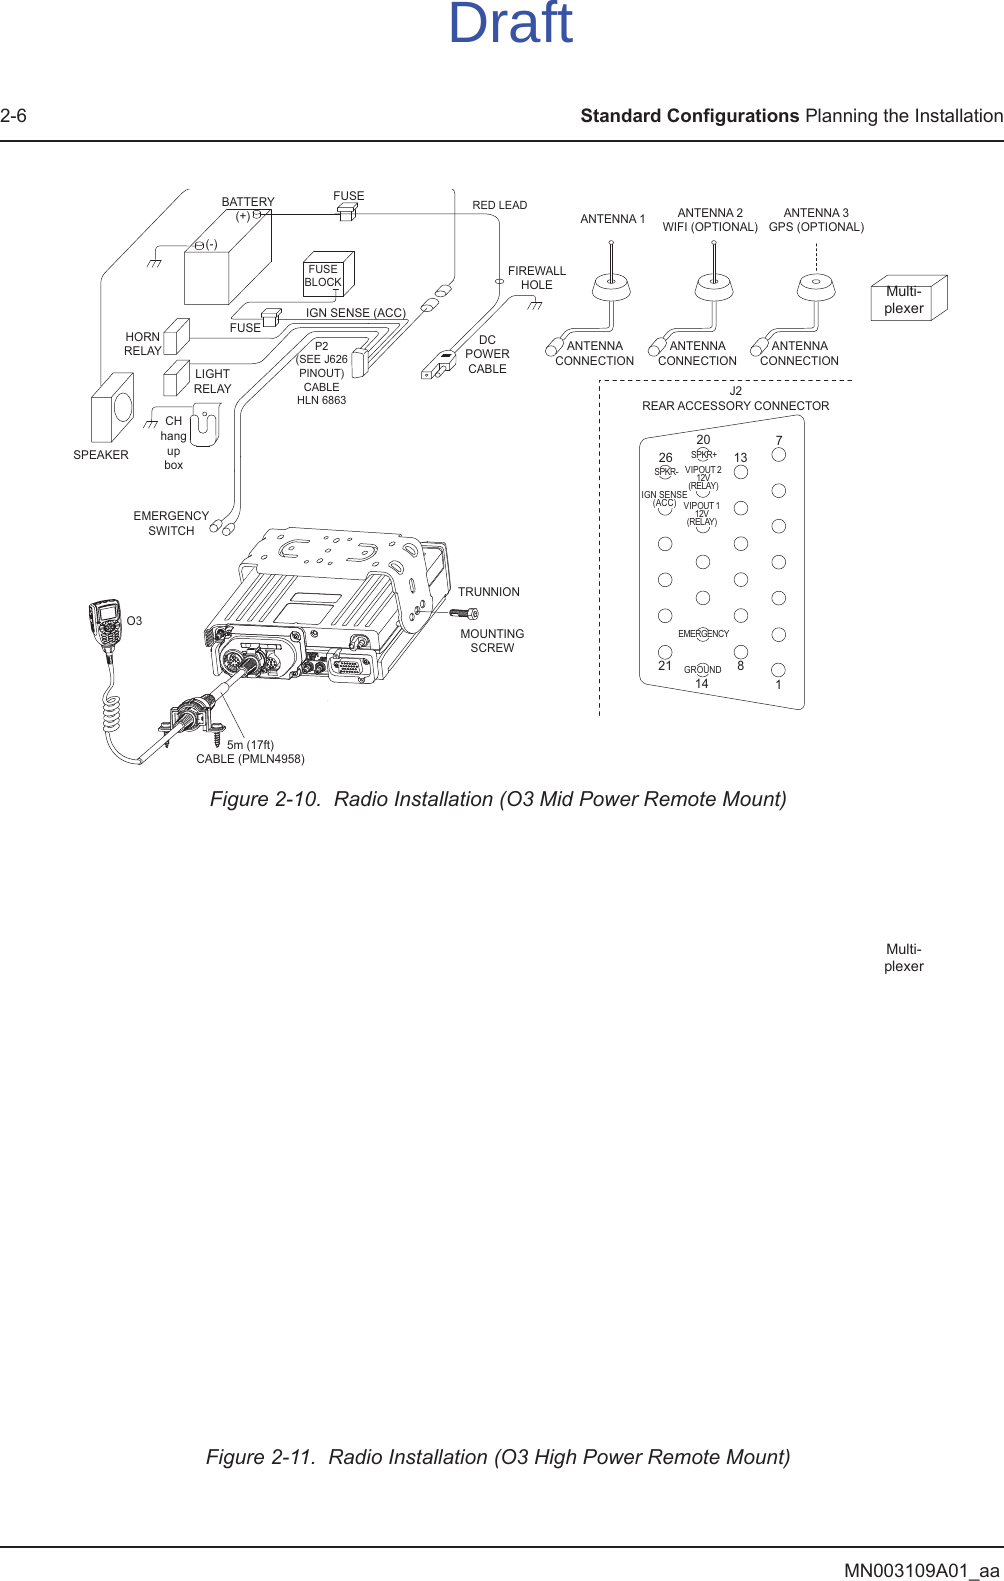 MN003109A01_aa2-6 Standard Configurations Planning the InstallationFigure 2-10.  Radio Installation (O3 Mid Power Remote Mount)Figure 2-11.  Radio Installation (O3 High Power Remote Mount)BATTERYHORNRELAY LIGHTRELAYCHhangupboxSPEAKERO35m (17ft) CABLE (PMLN4958)EMERGENCYSWITCHFUSEFUSEBLOCK(+)(-)RED LEADFUSEFIREWALLHOLEMOUNTINGSCREWIGN SENSE (ACC)P2(SEE J626PINOUT)CABLE HLN 6863DCPOWERCABLETRUNNIONANTENNA CONNECTION ANTENNA 1J2REAR ACCESSORY CONNECTOR1781413202126SPKR-SPKR+VIPOUT 212V(RELAY)VIPOUT 112V(RELAY)GROUNDEMERGENCYIGN SENSE(ACC)ANTENNA CONNECTION ANTENNA 2WIFI (OPTIONAL)ANTENNA CONNECTION ANTENNA 3GPS (OPTIONAL)Multi-plexerMulti-plexerDraft